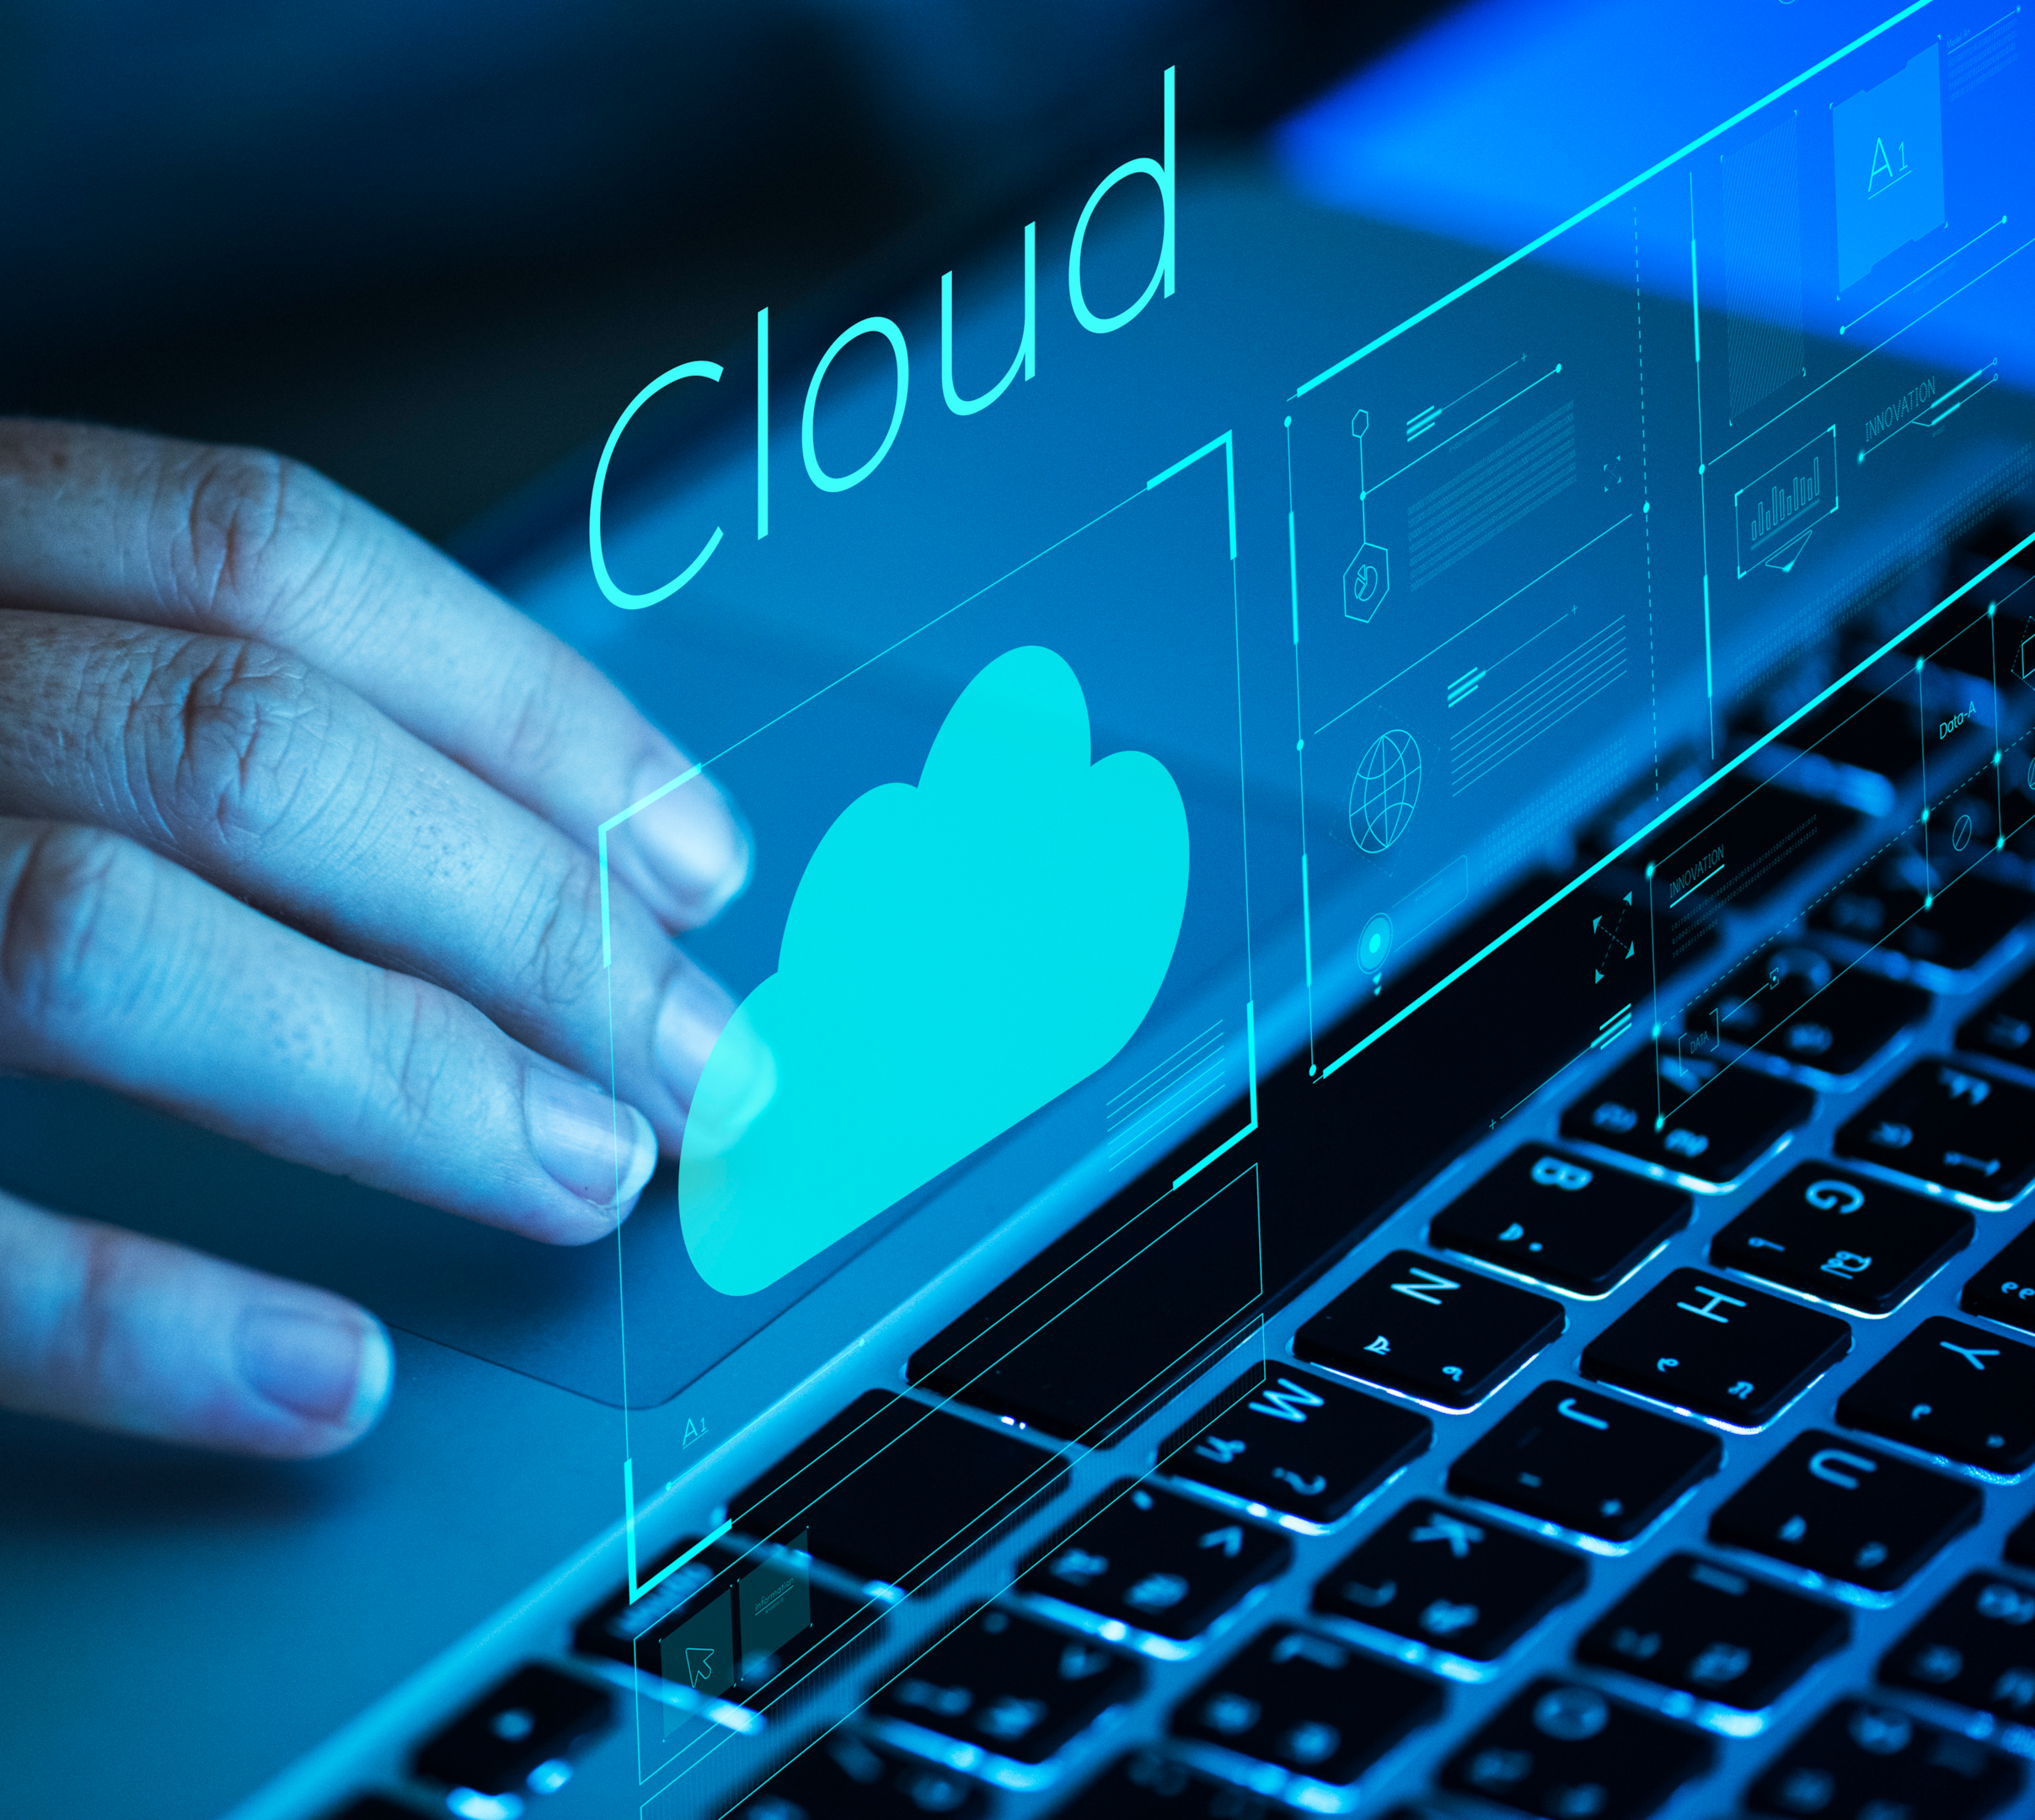 The illustration depicts a hand scrolling a laptop and the icon of the cloud as a symbol of successful cloud adoption